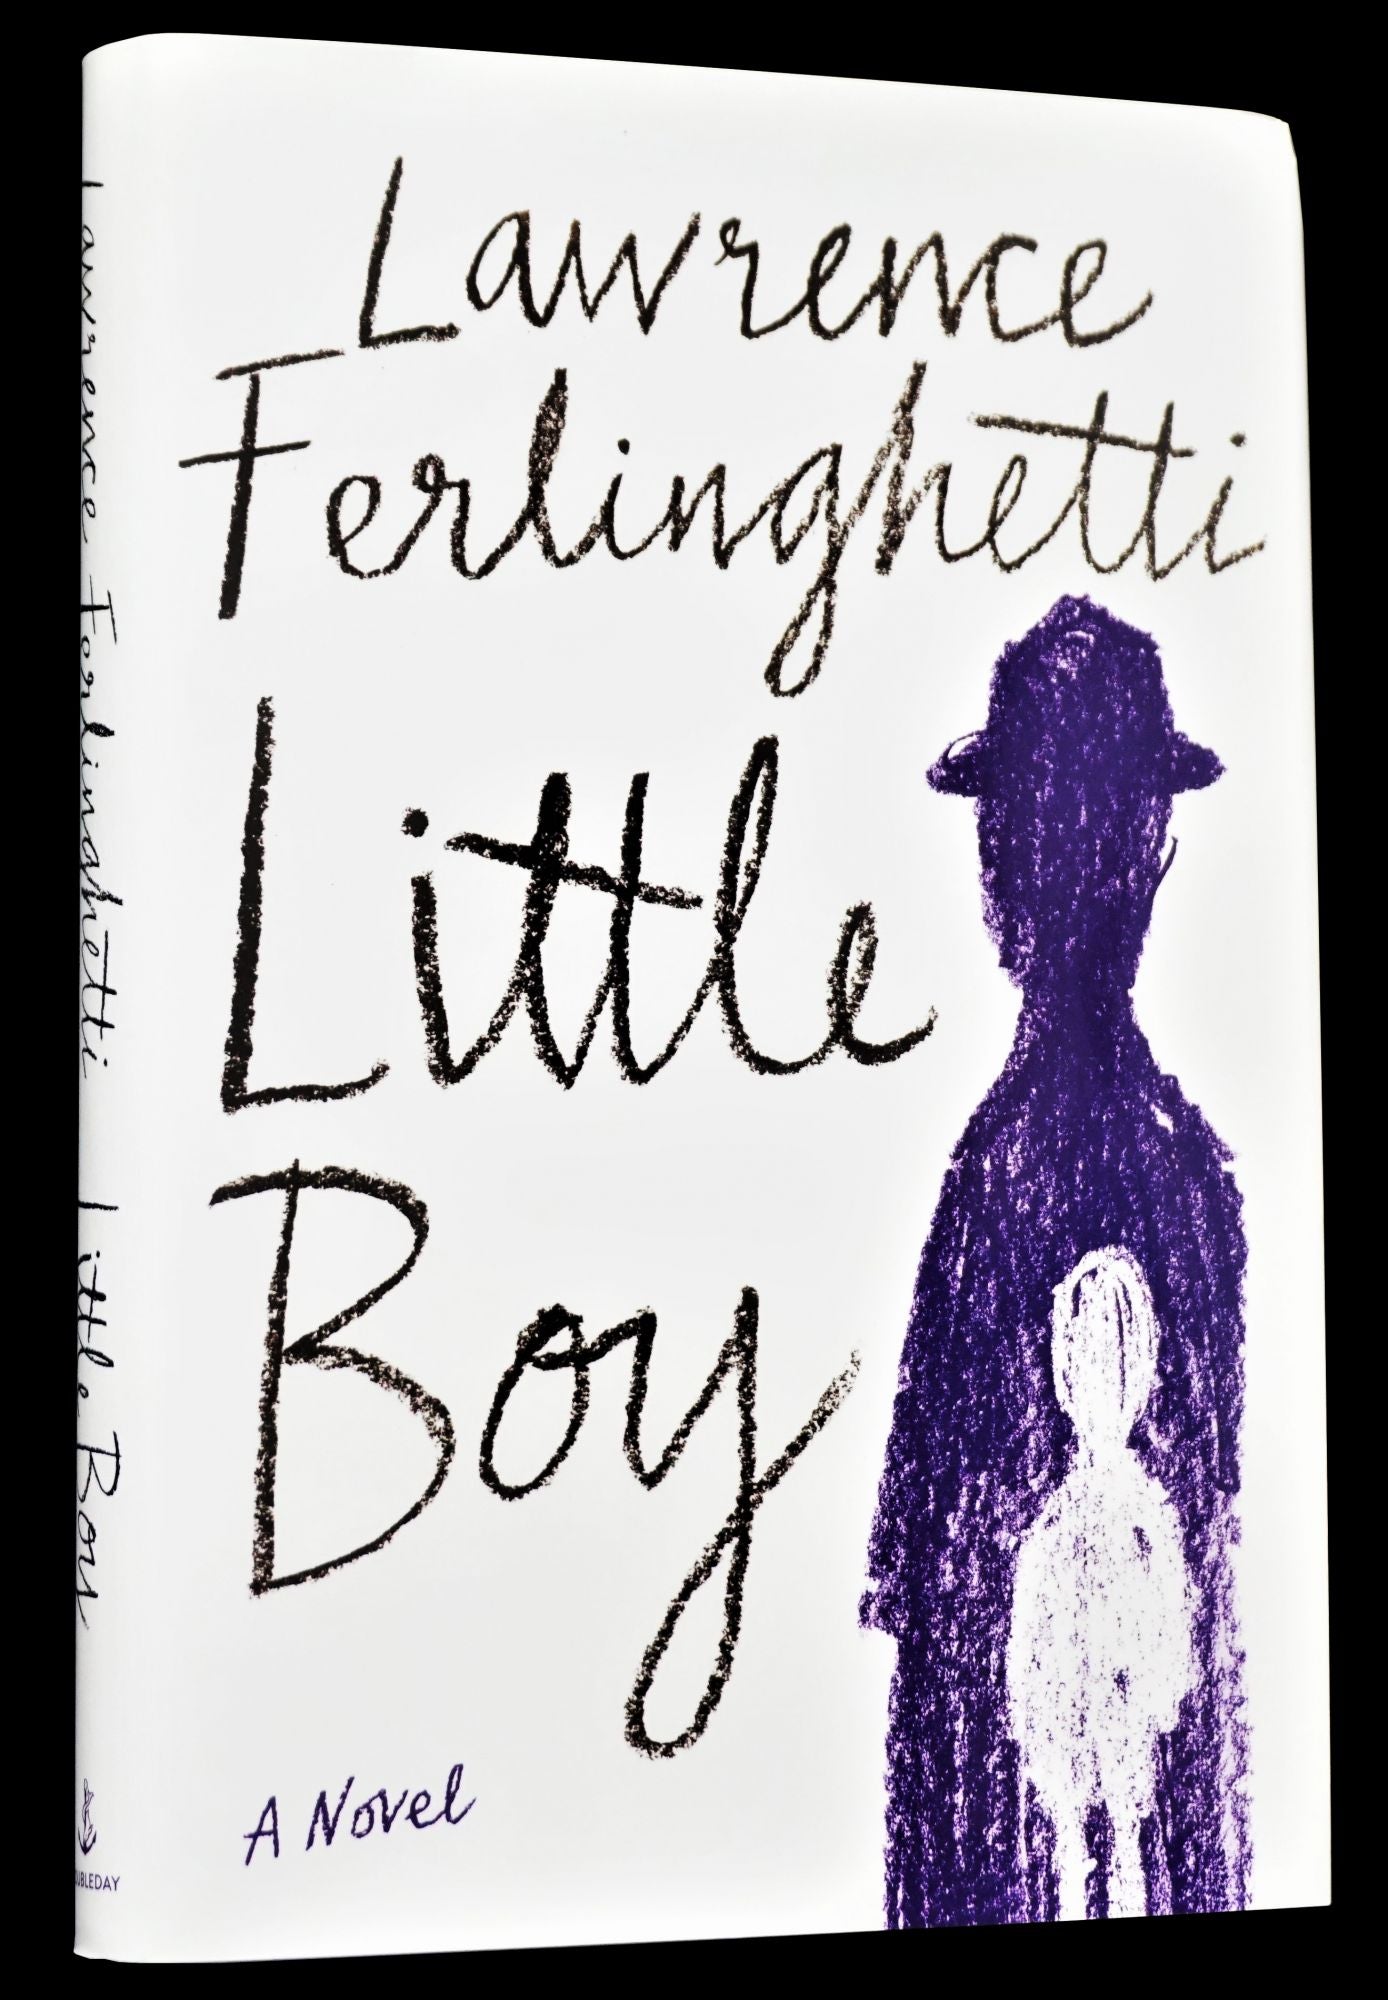 Little Boy with: Her by Lawrence Ferlinghetti on Third Mind Books